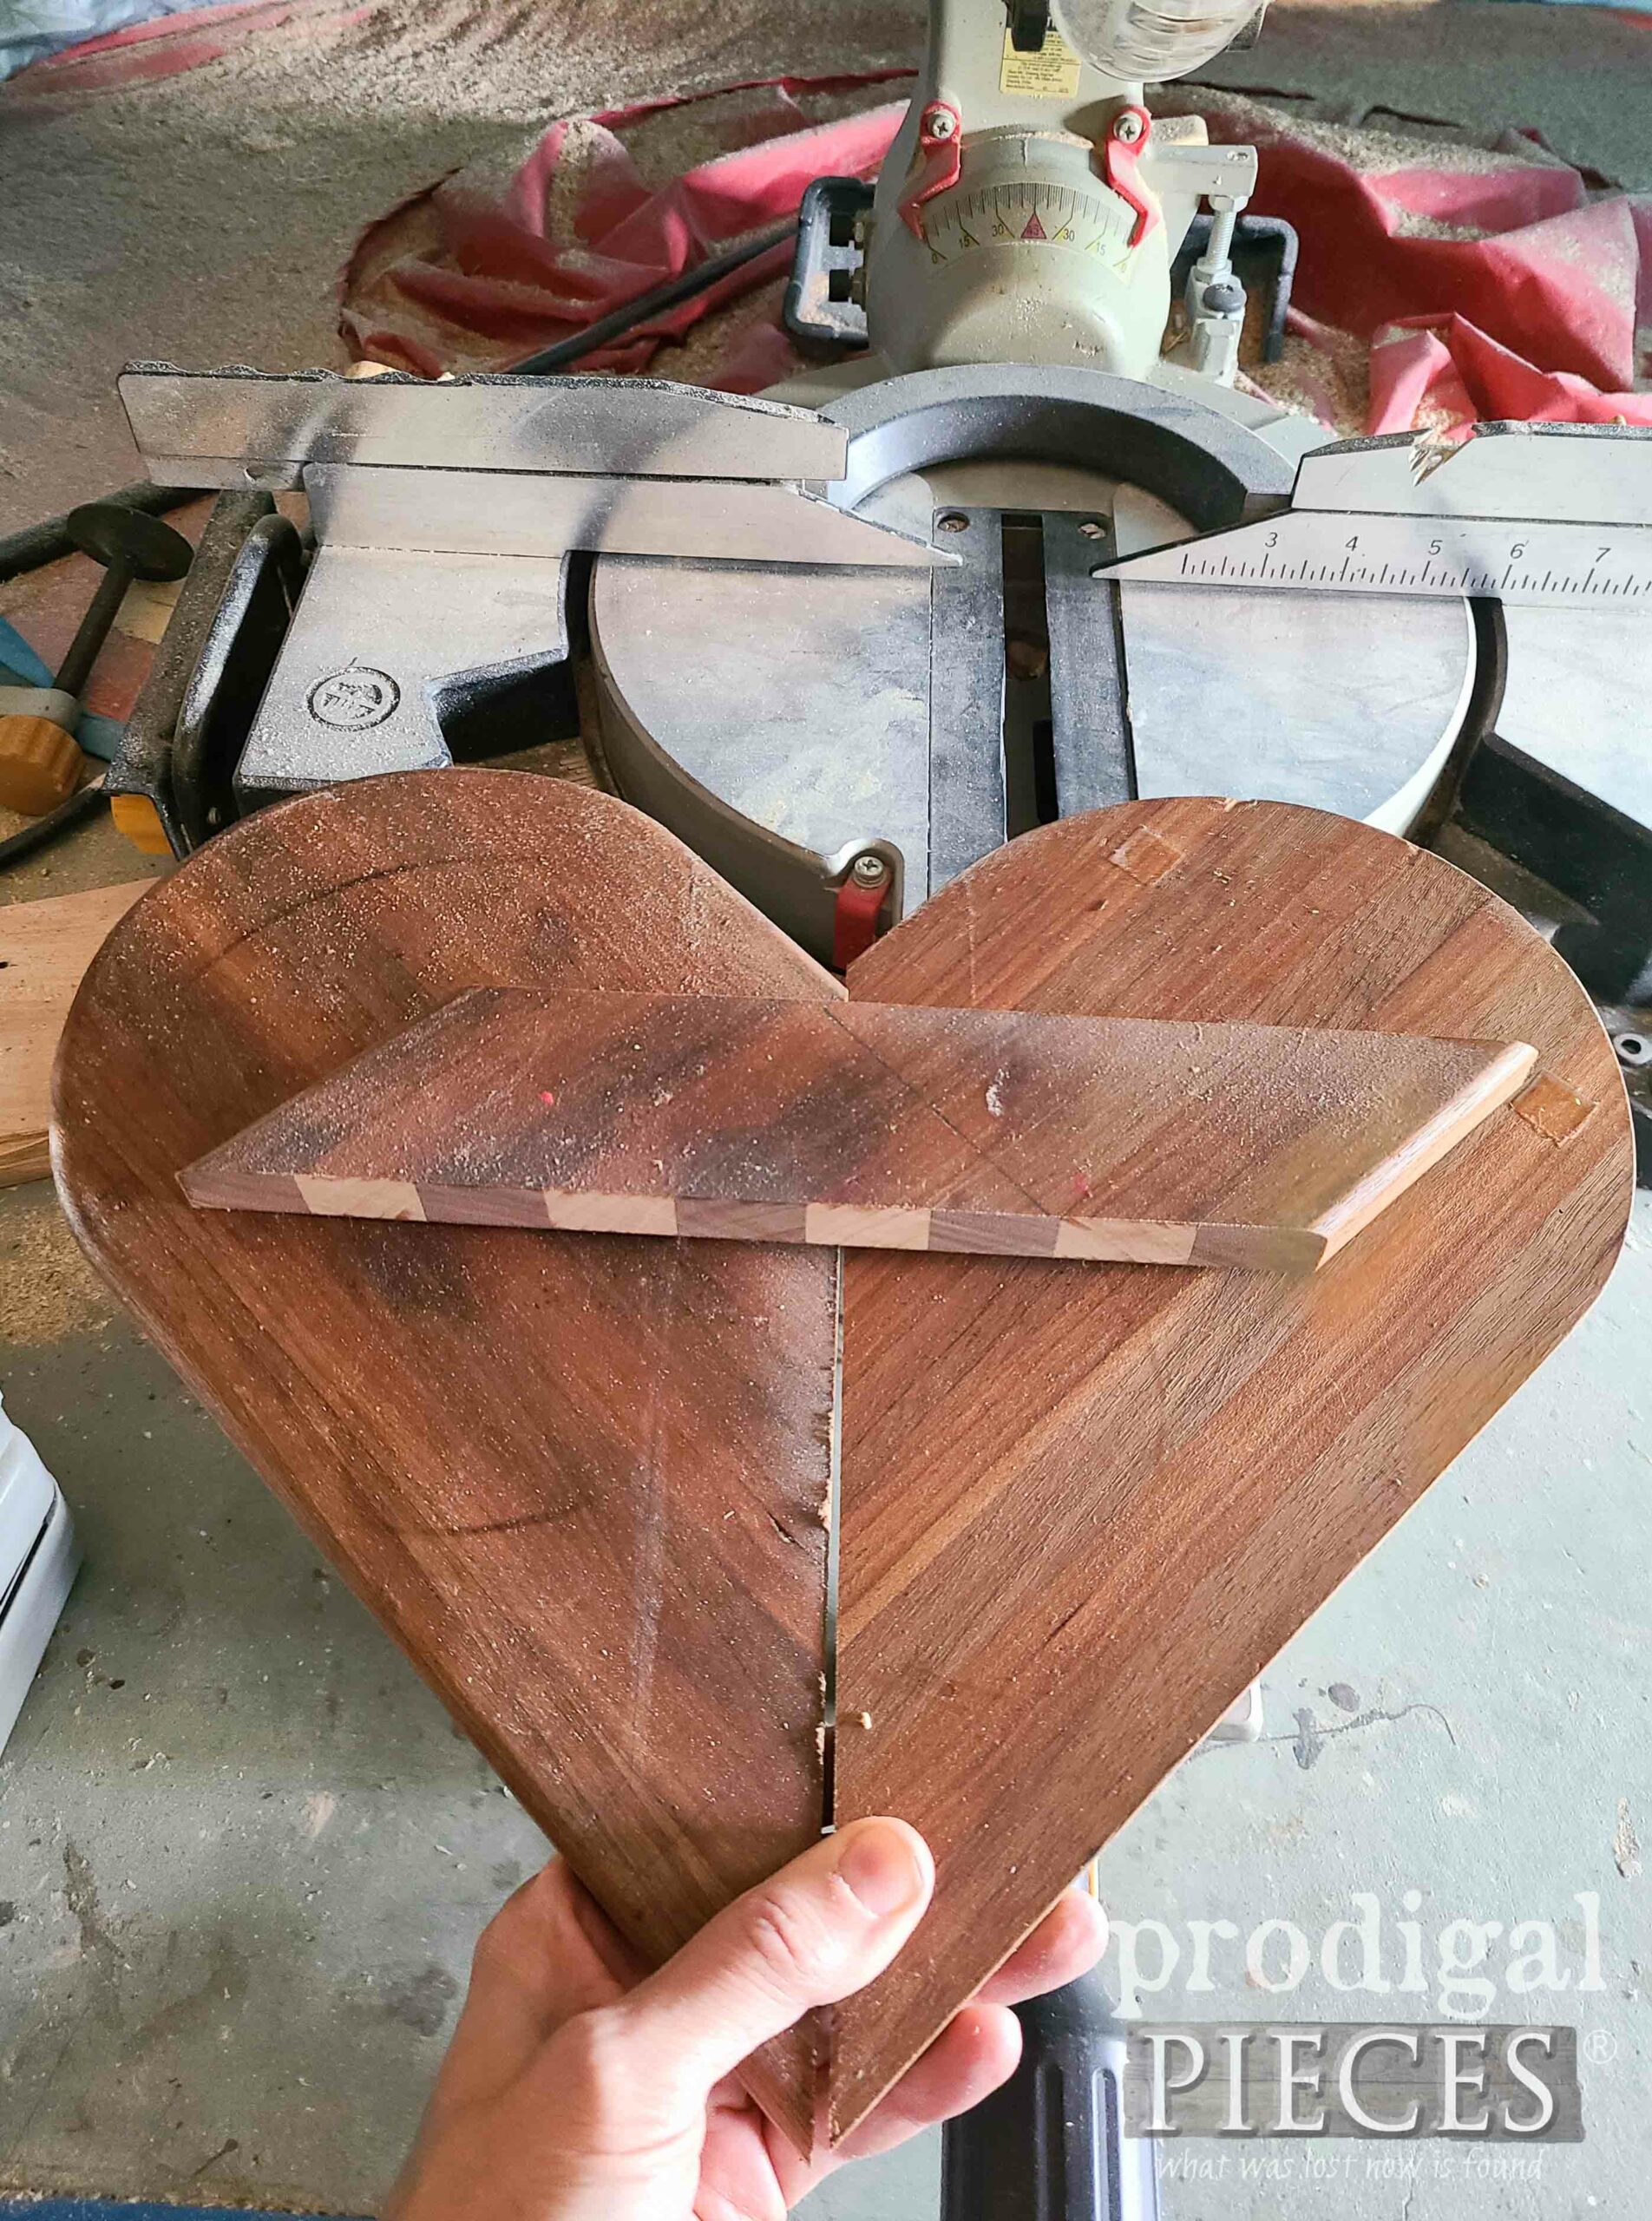 Dry Fit of Wooden Heart from Upcycled Trivet | prodigalpieces.com #prodigalpieces